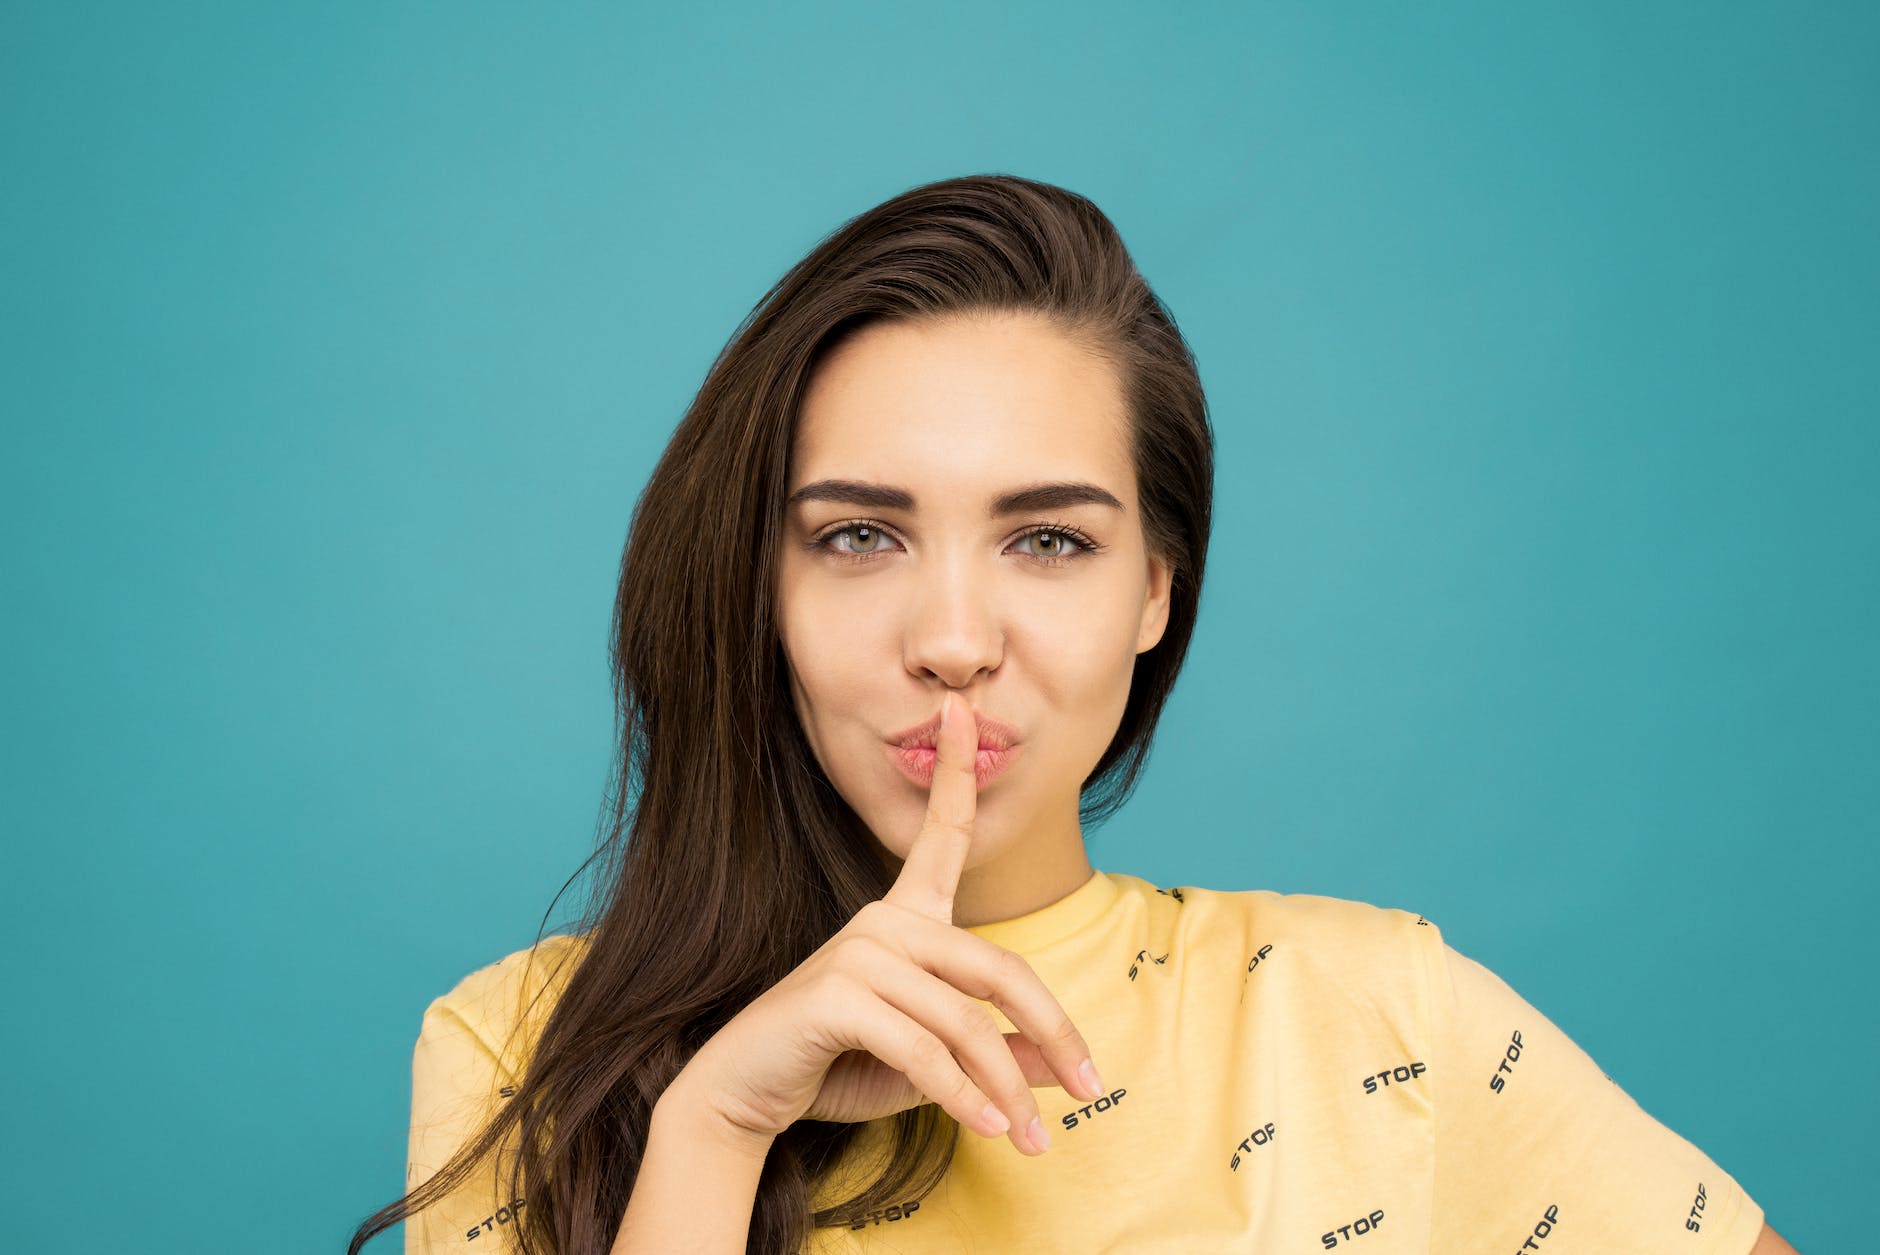 portrait photo of woman in yellow t shirt doing the shh sign while standing in front of blue background